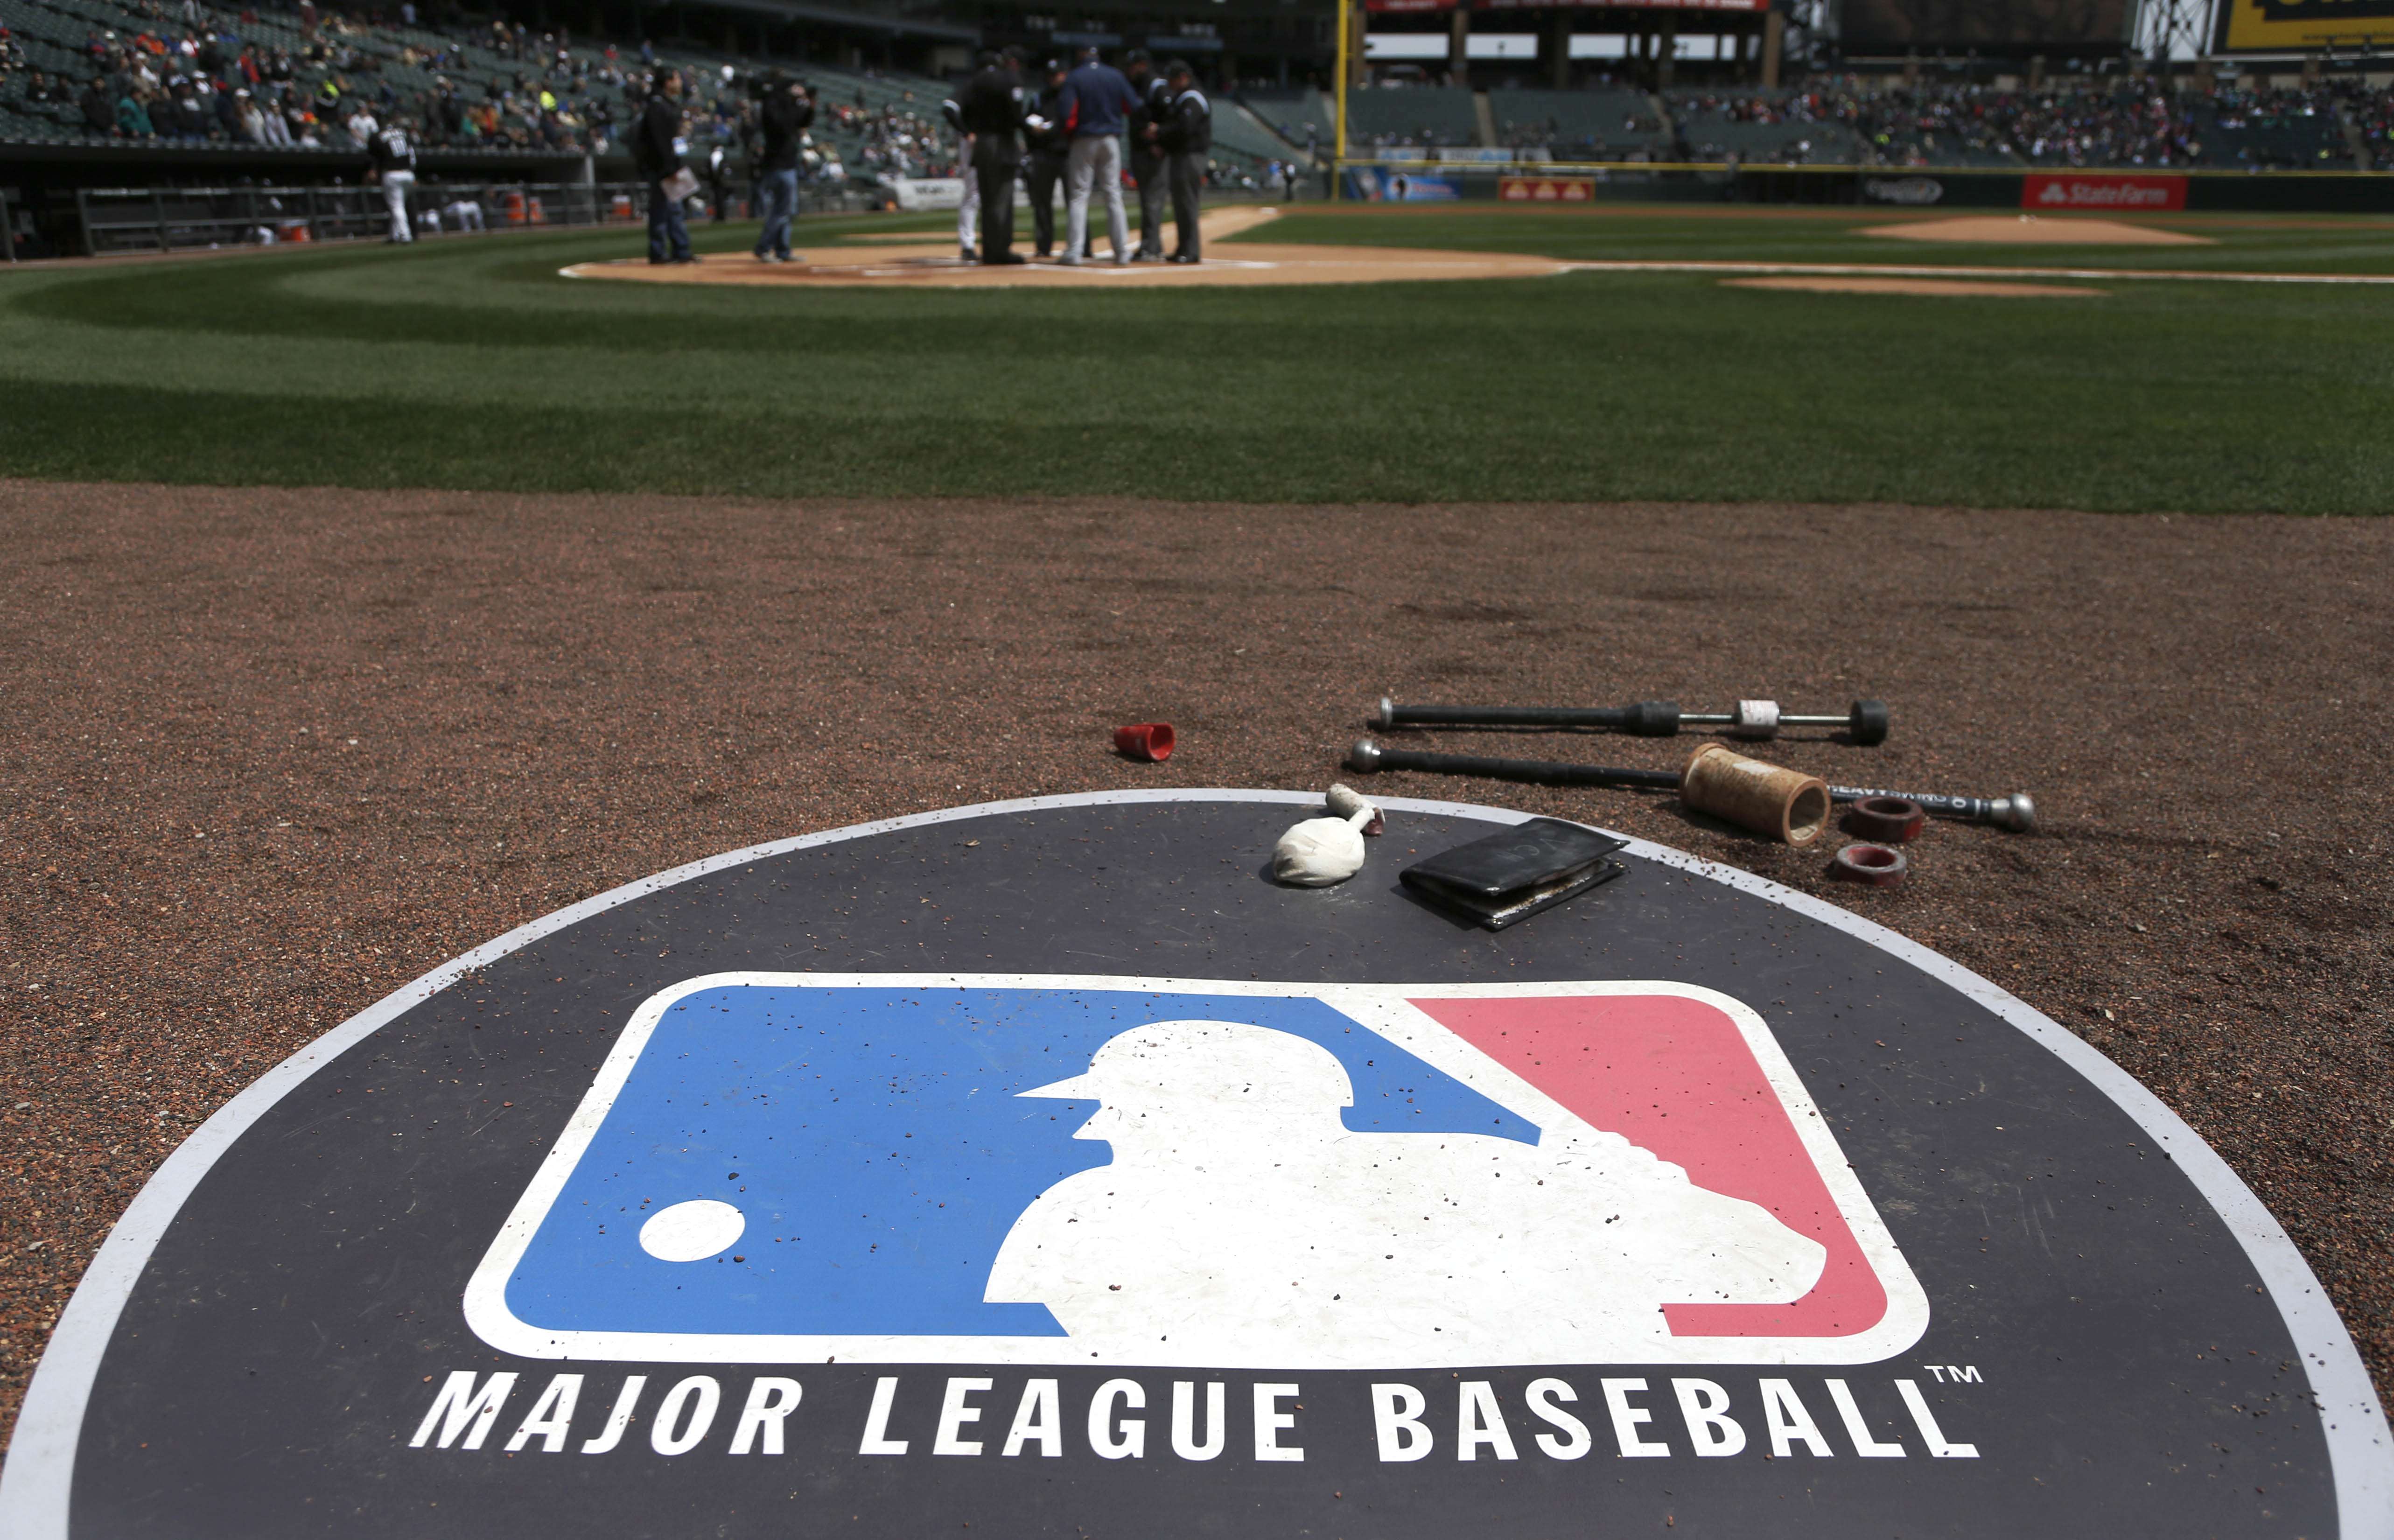 Major League Baseball Schedule 2022 Mlb Announces Complete 2022 Schedule; Opening Day Set For March 31 |  Bleacher Report | Latest News, Videos And Highlights